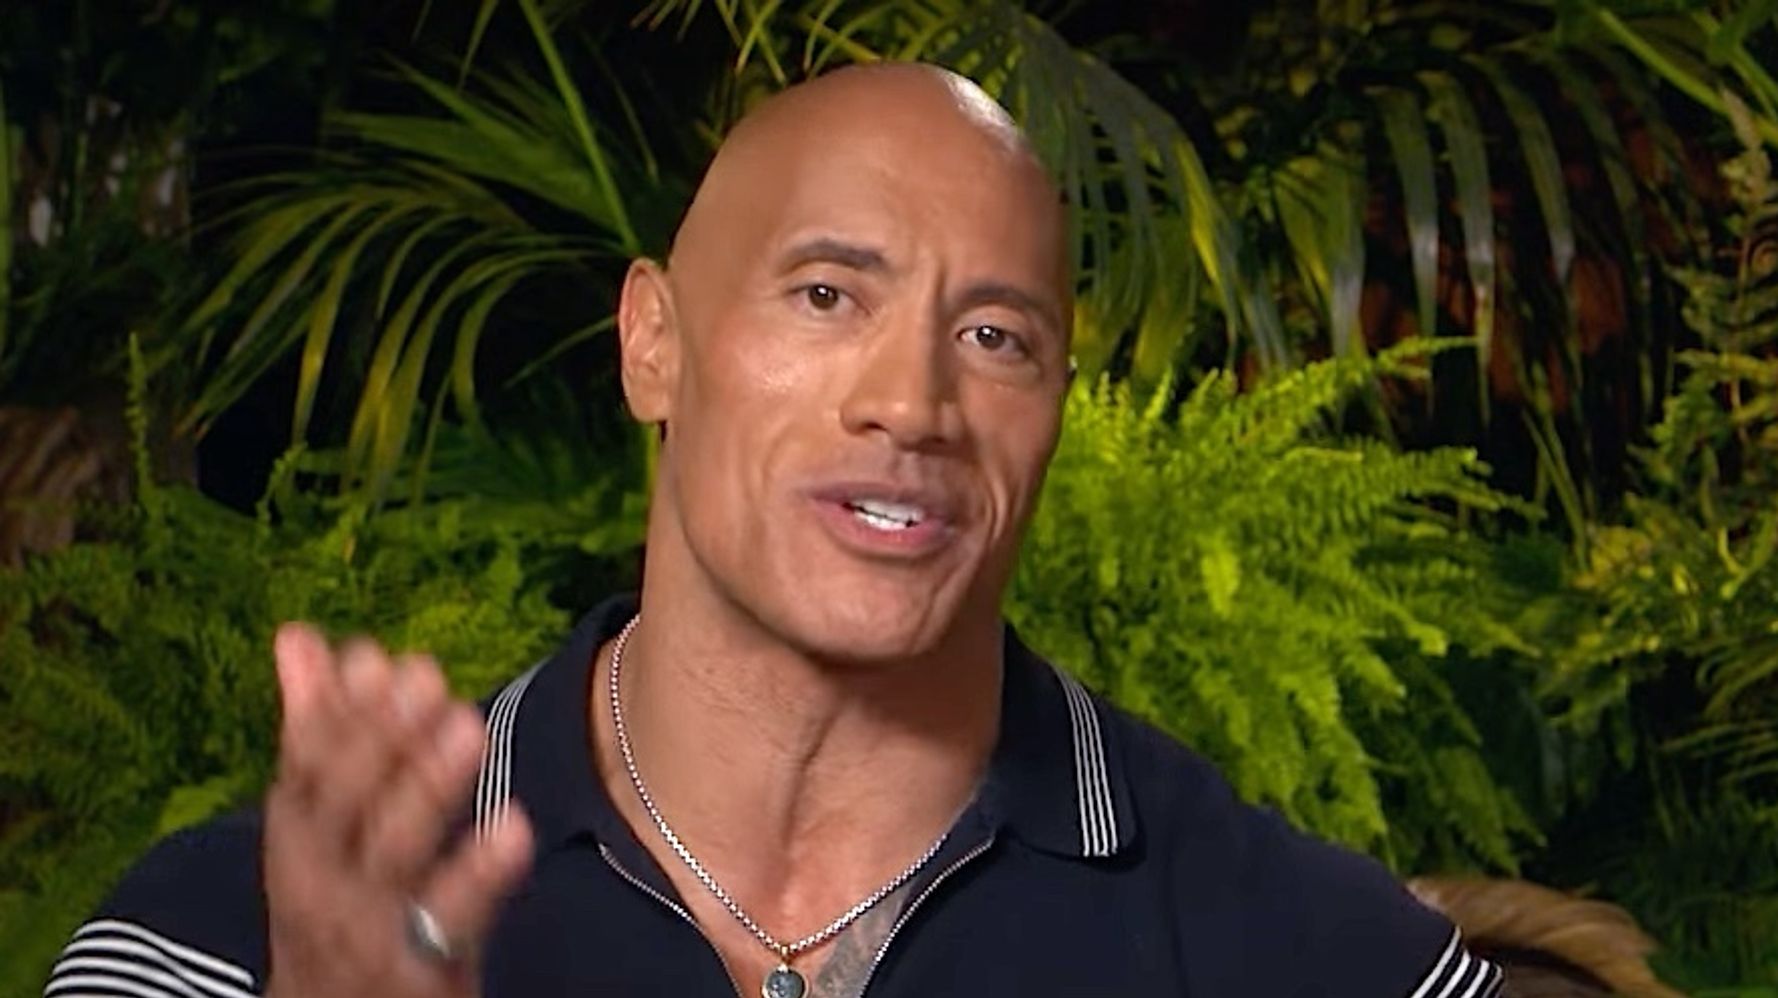 Dwayne Johnson Answers A 'F**ked Up' Question About His Abs